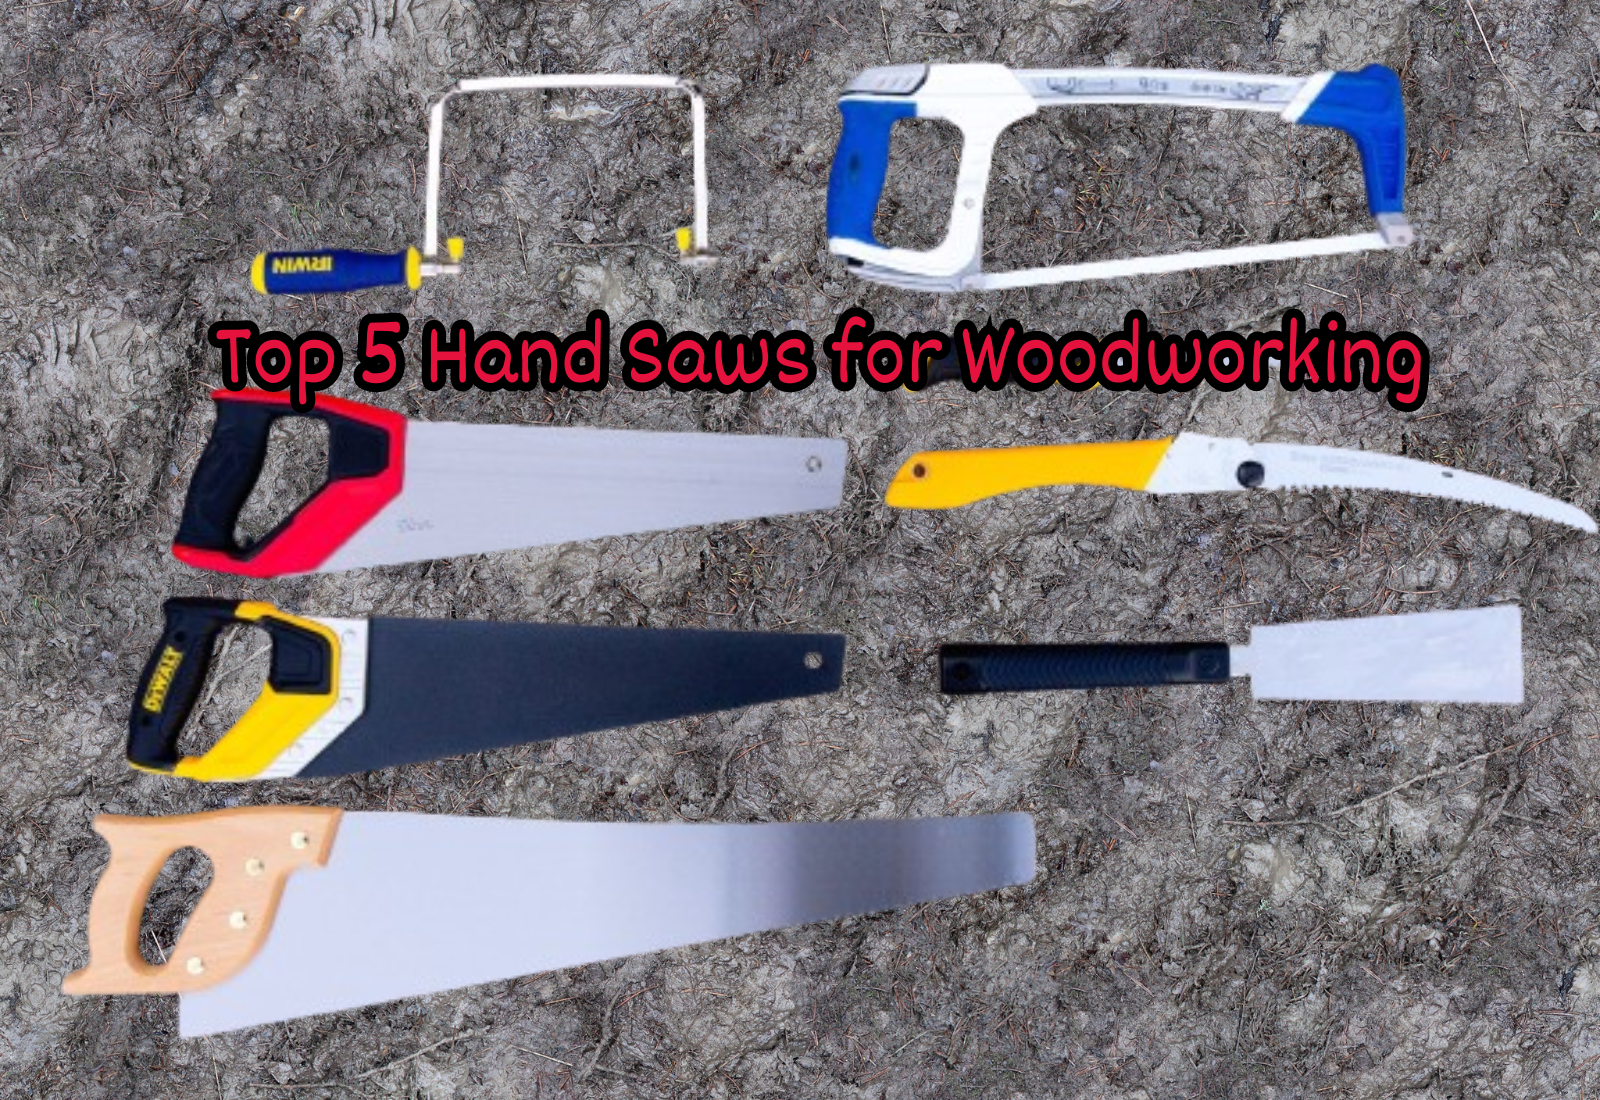 Top 5 Hand Saws for Woodworking